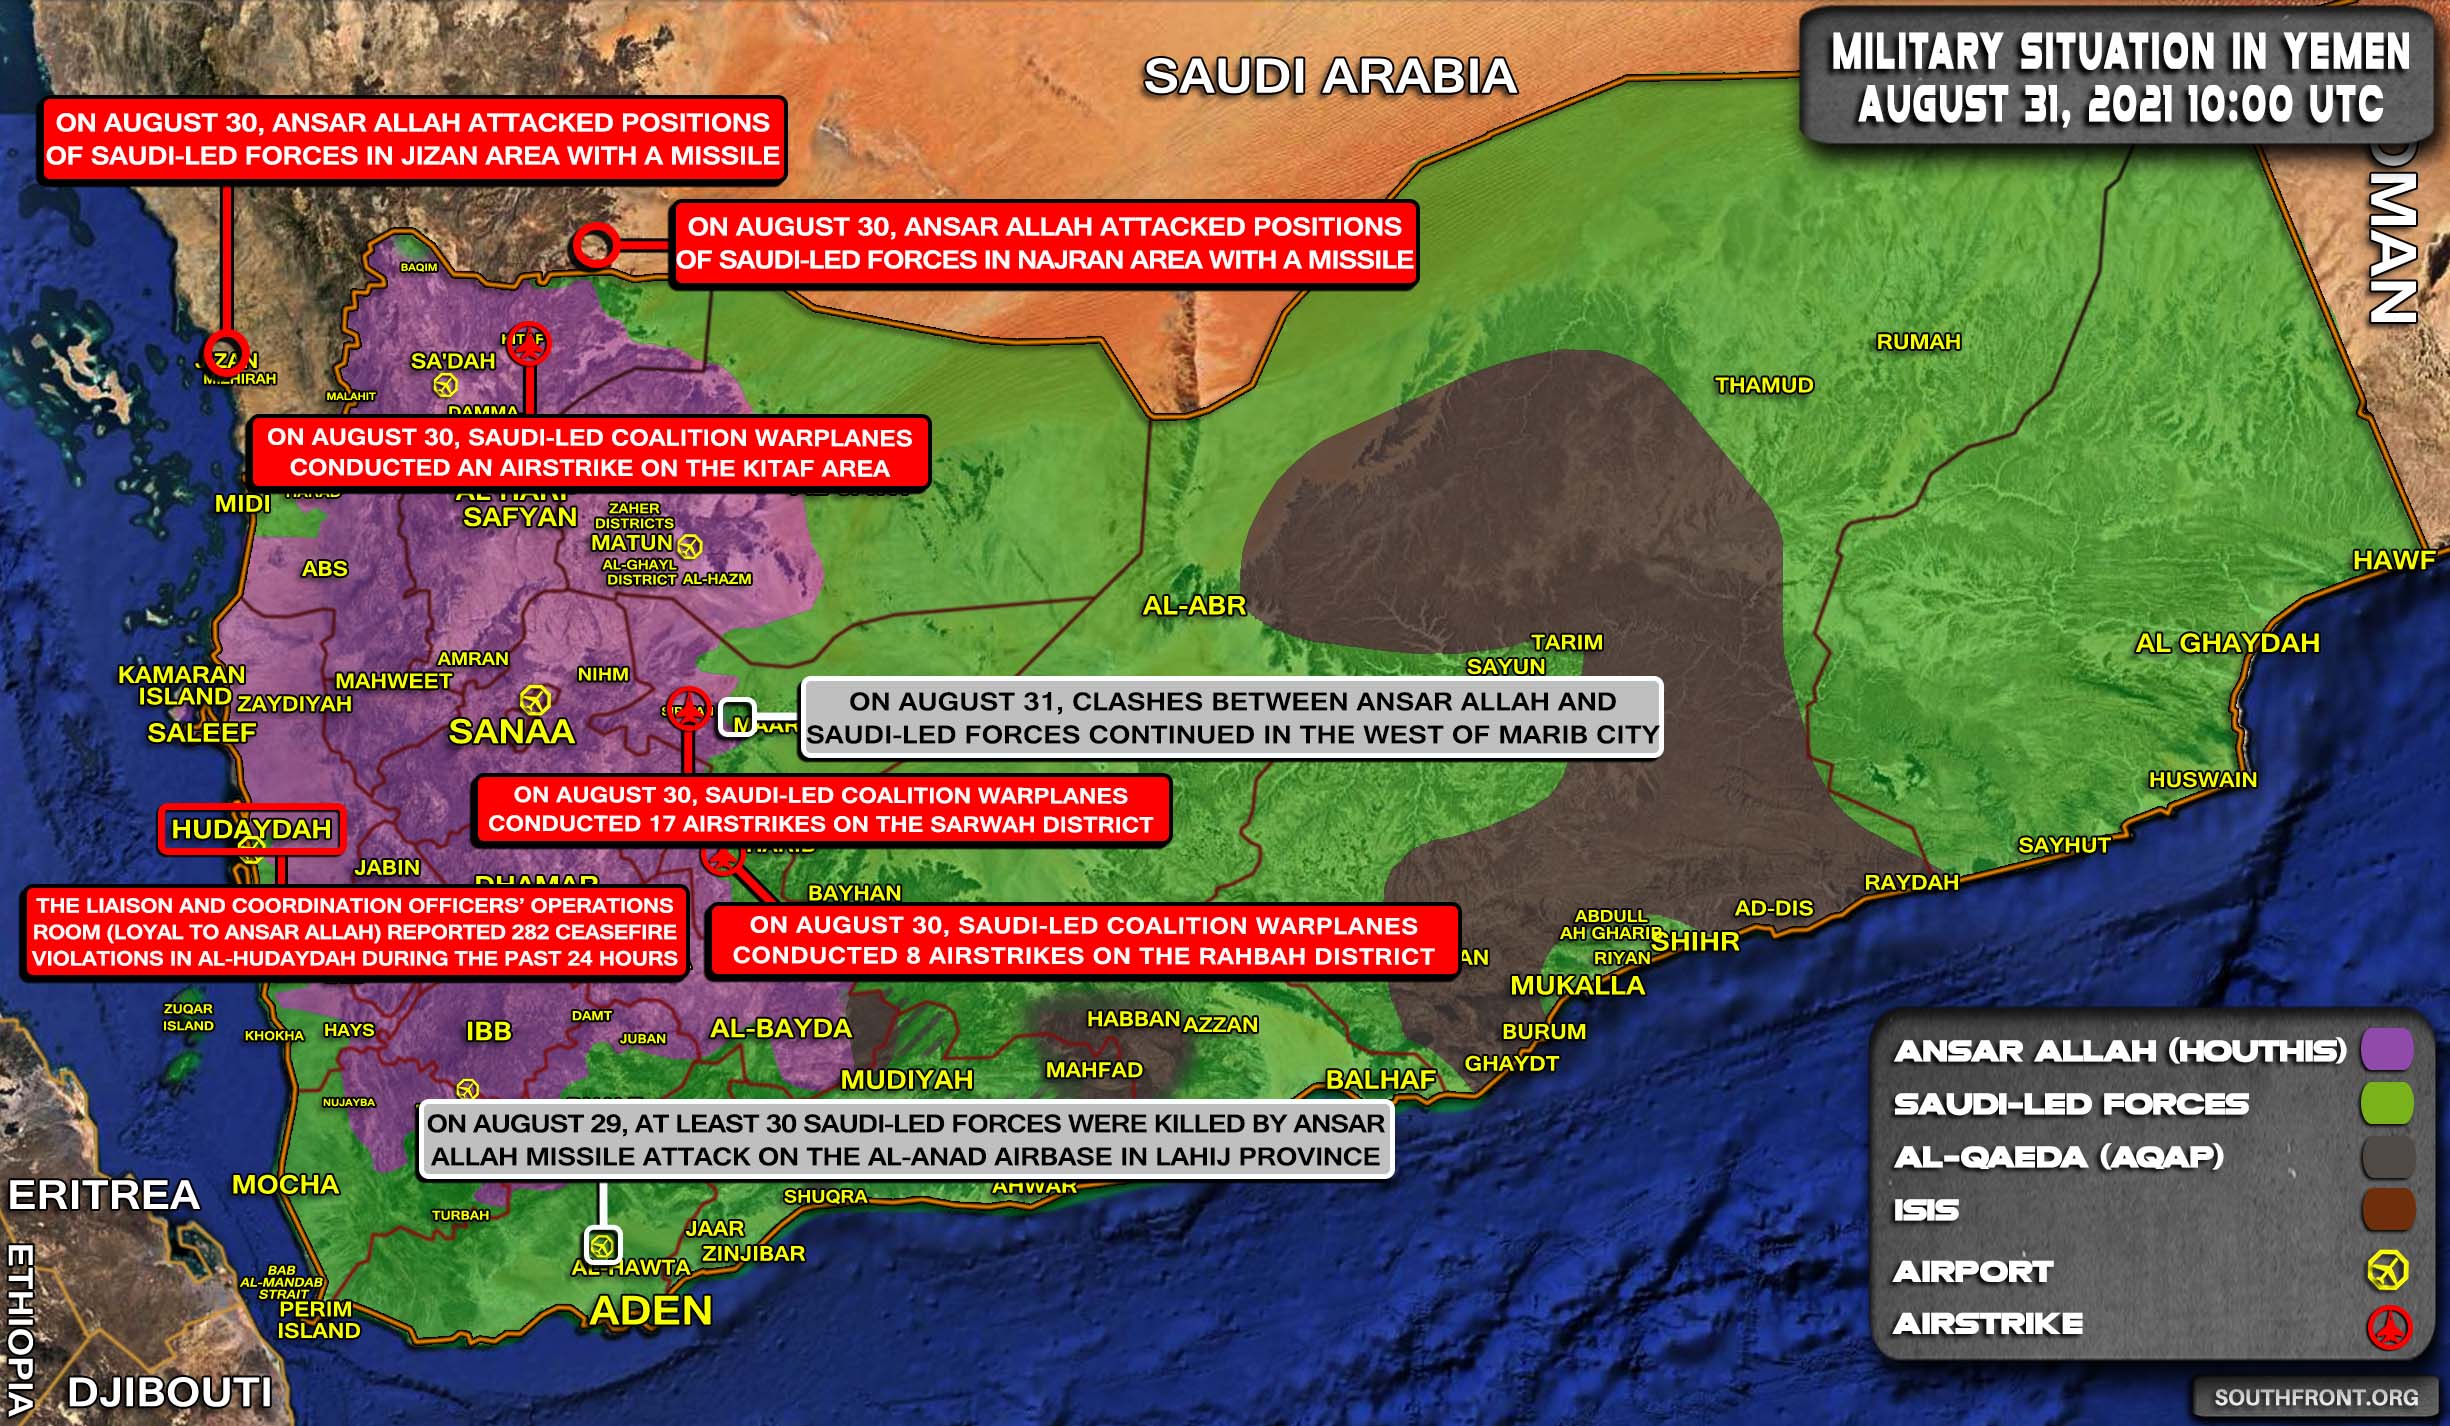 Hard Day For Saudi-Led Forces: Houthis Launched Several Attacks Both In Yemen And Saudi Arabia